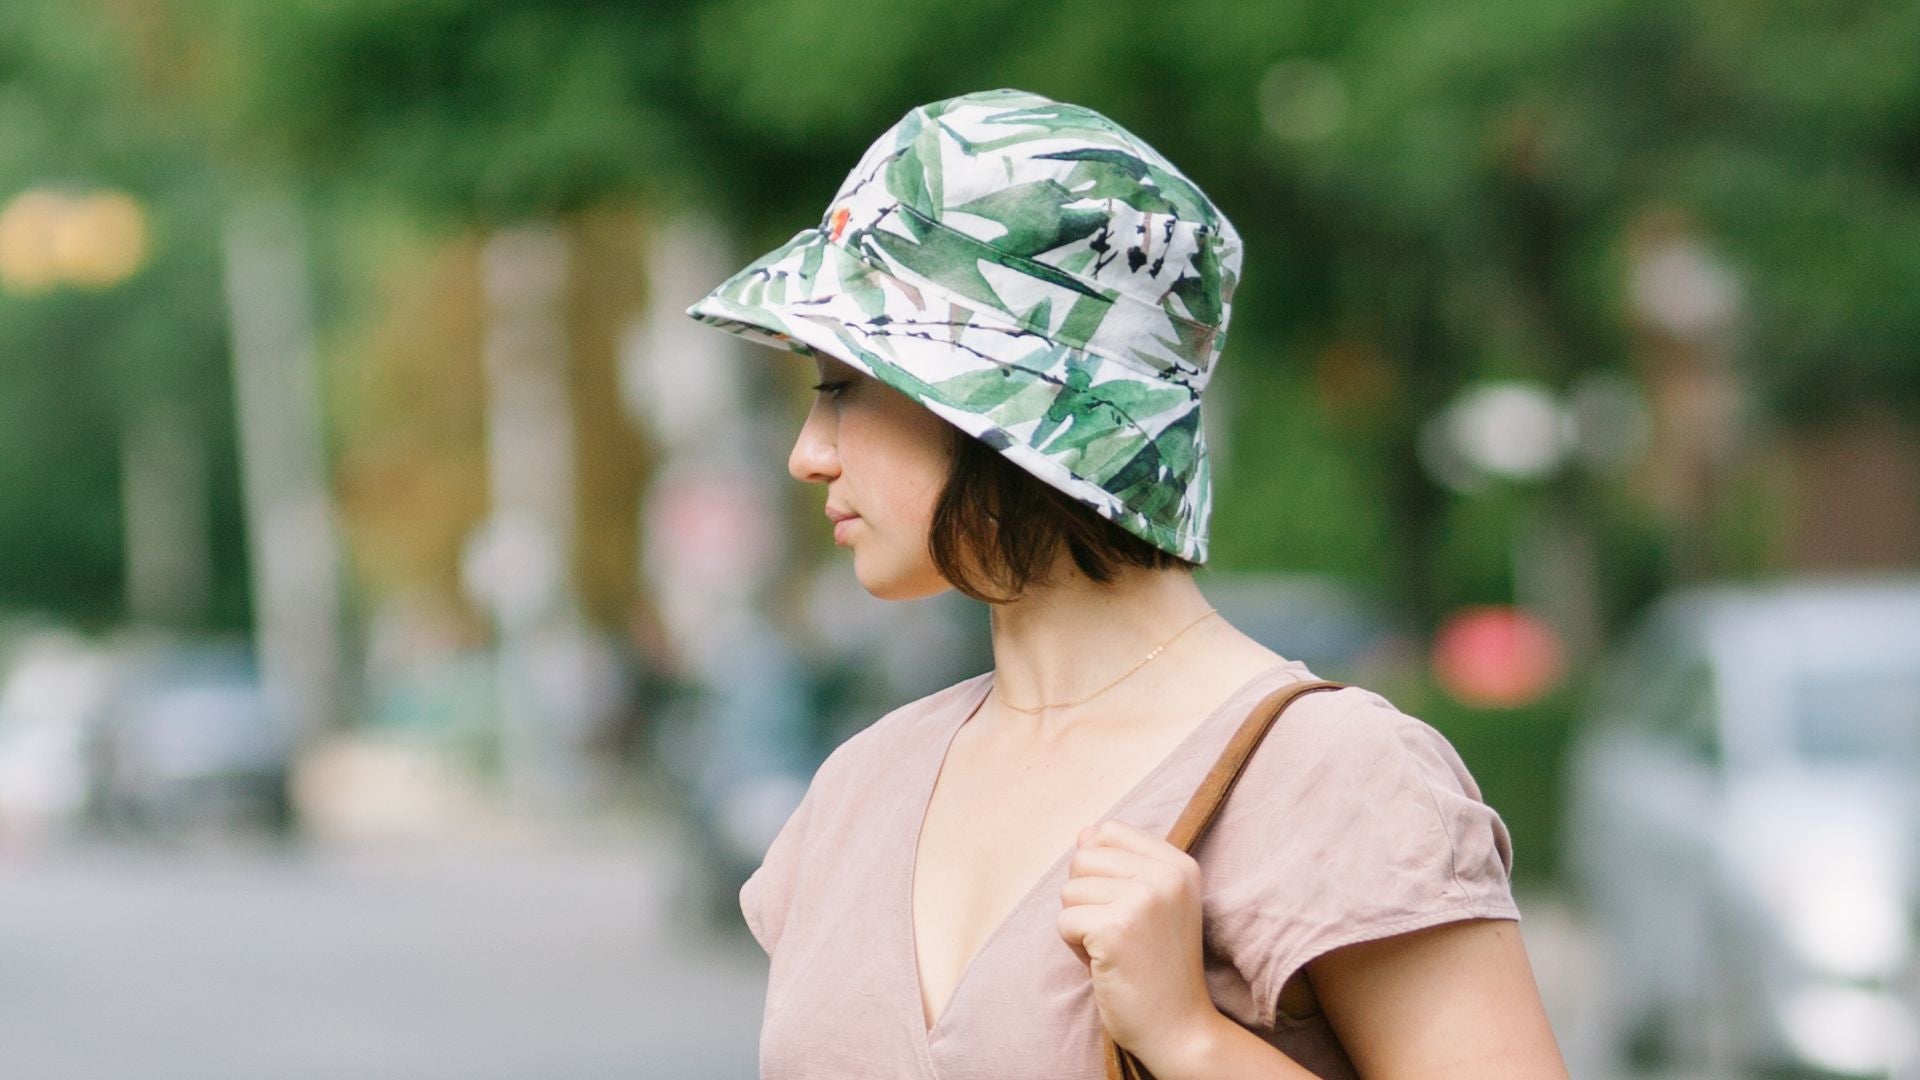 Three inch wide brim sun hat for active wear provides coverage of face and neck while allowing a range of vision. Made in Canada by Puffin Gear. 